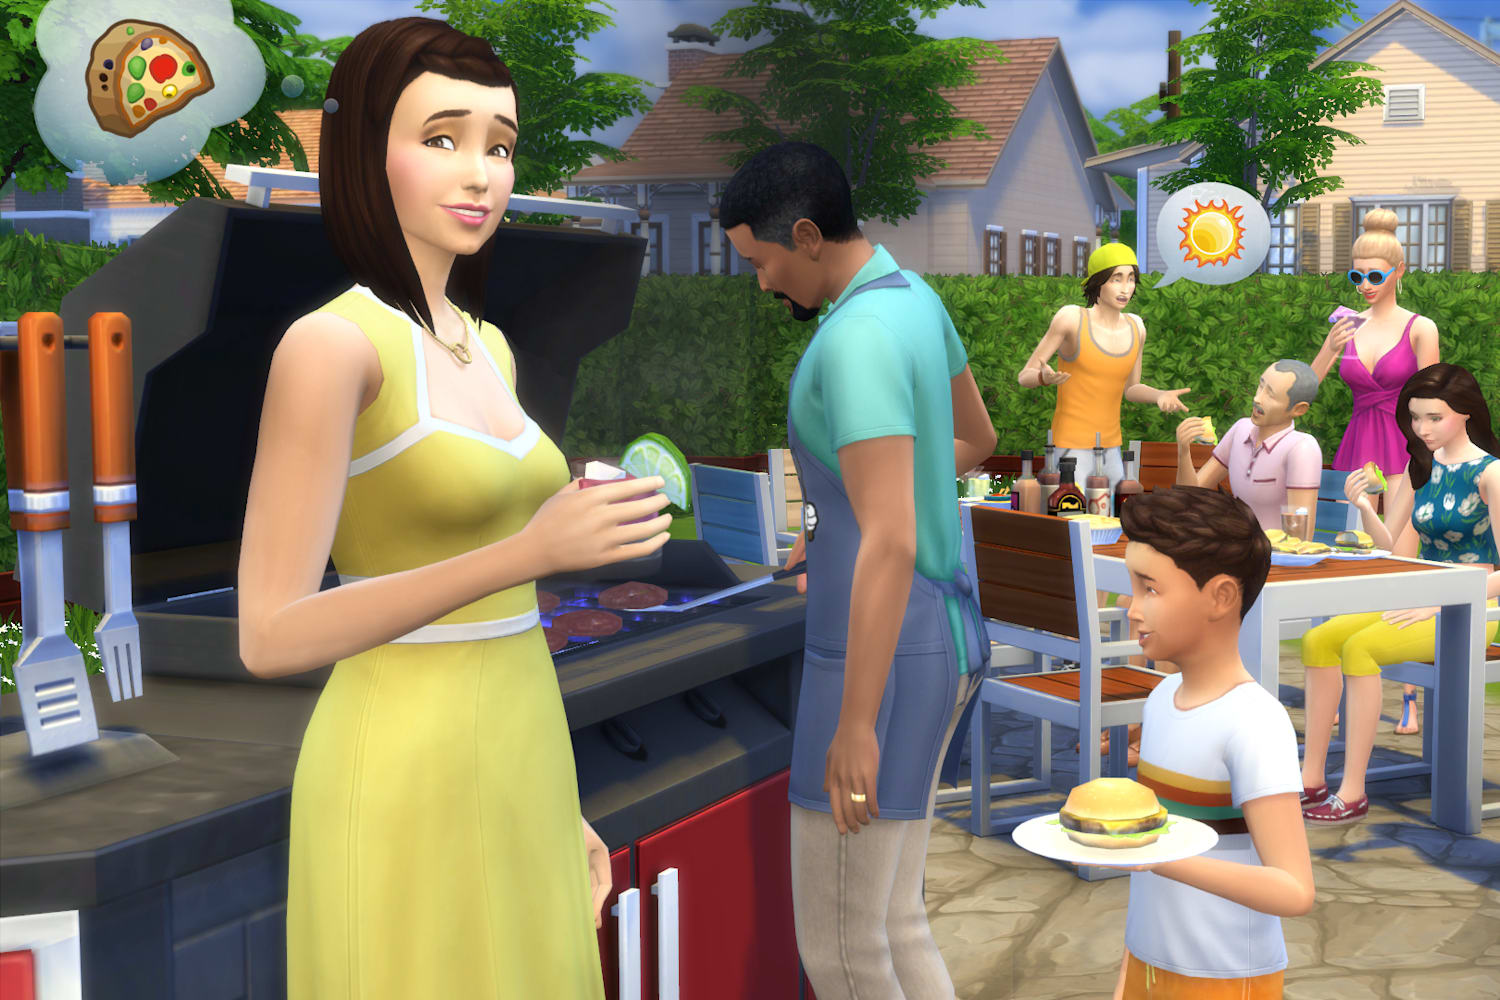 Sims 4 Ps4 Xbox One 5 Tips To Get The Most Out Of It